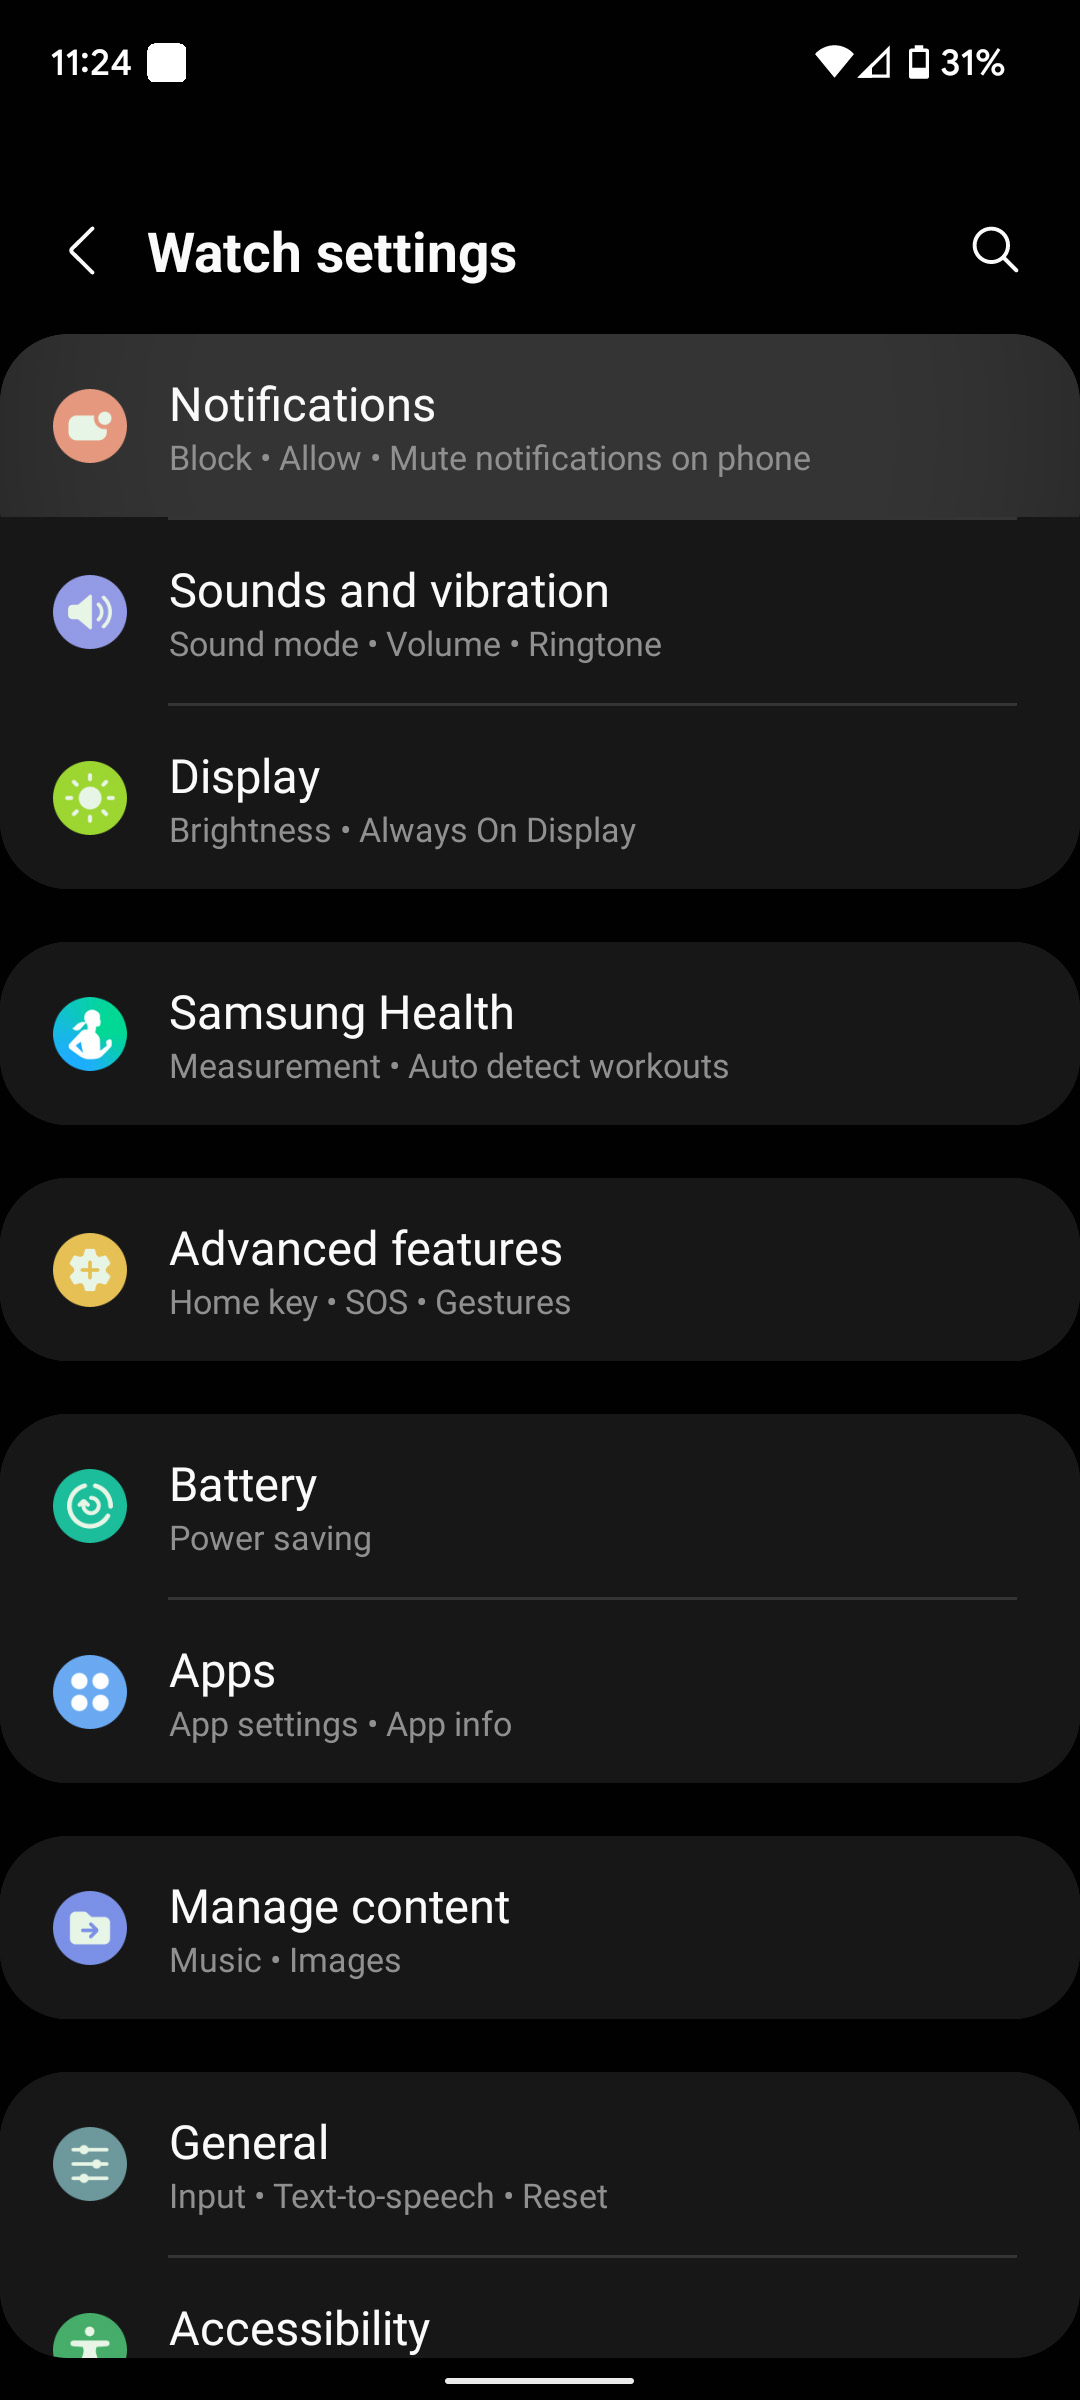 How to set up and manage notifications on the Galaxy Watch 4